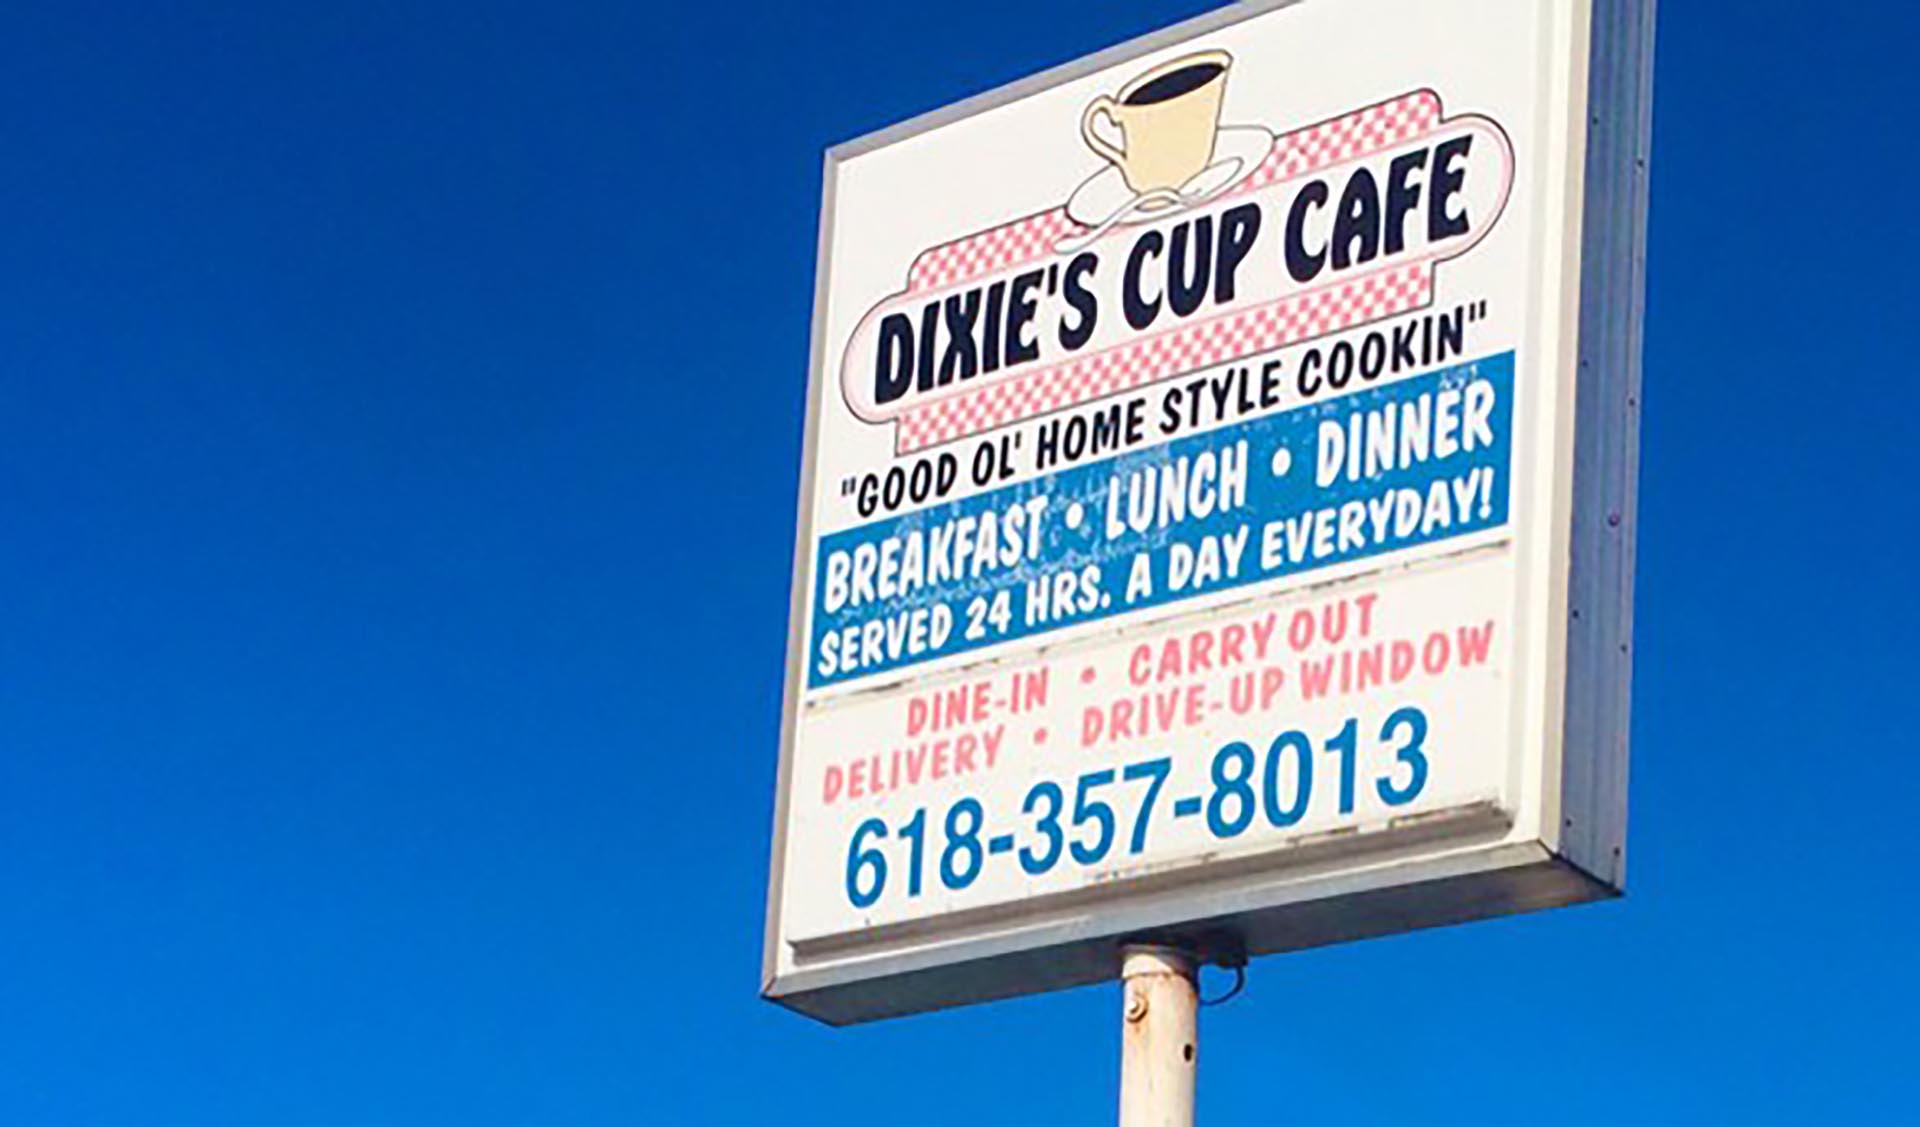 Dixie's Cup Cafe